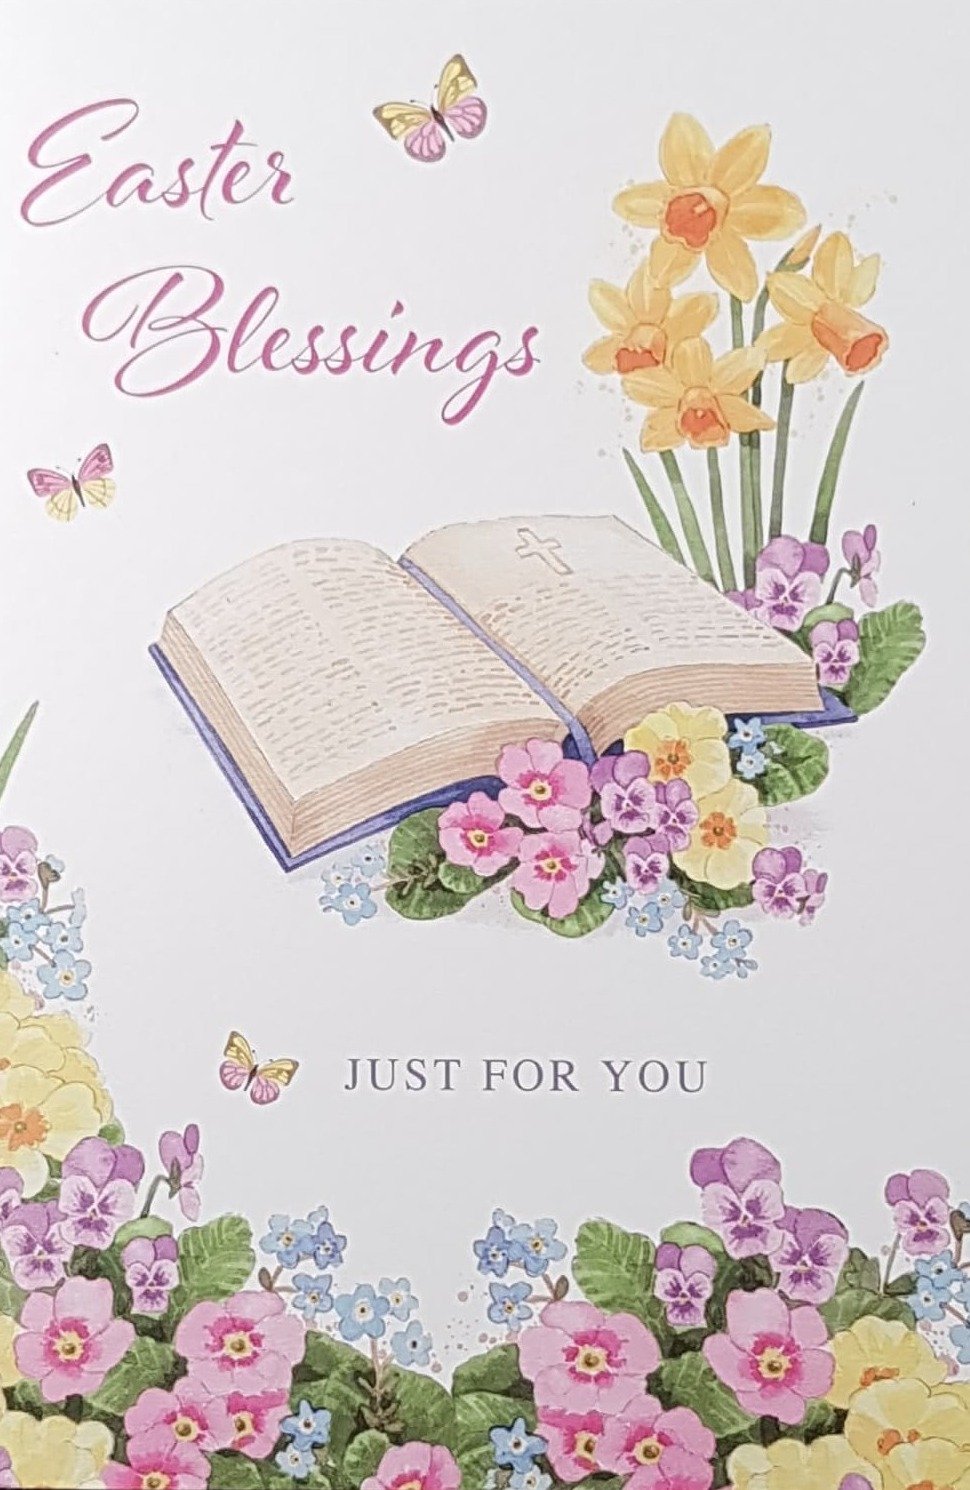 Easter Card - Easter Blessings Just For You / A Bible & Pink Flowers